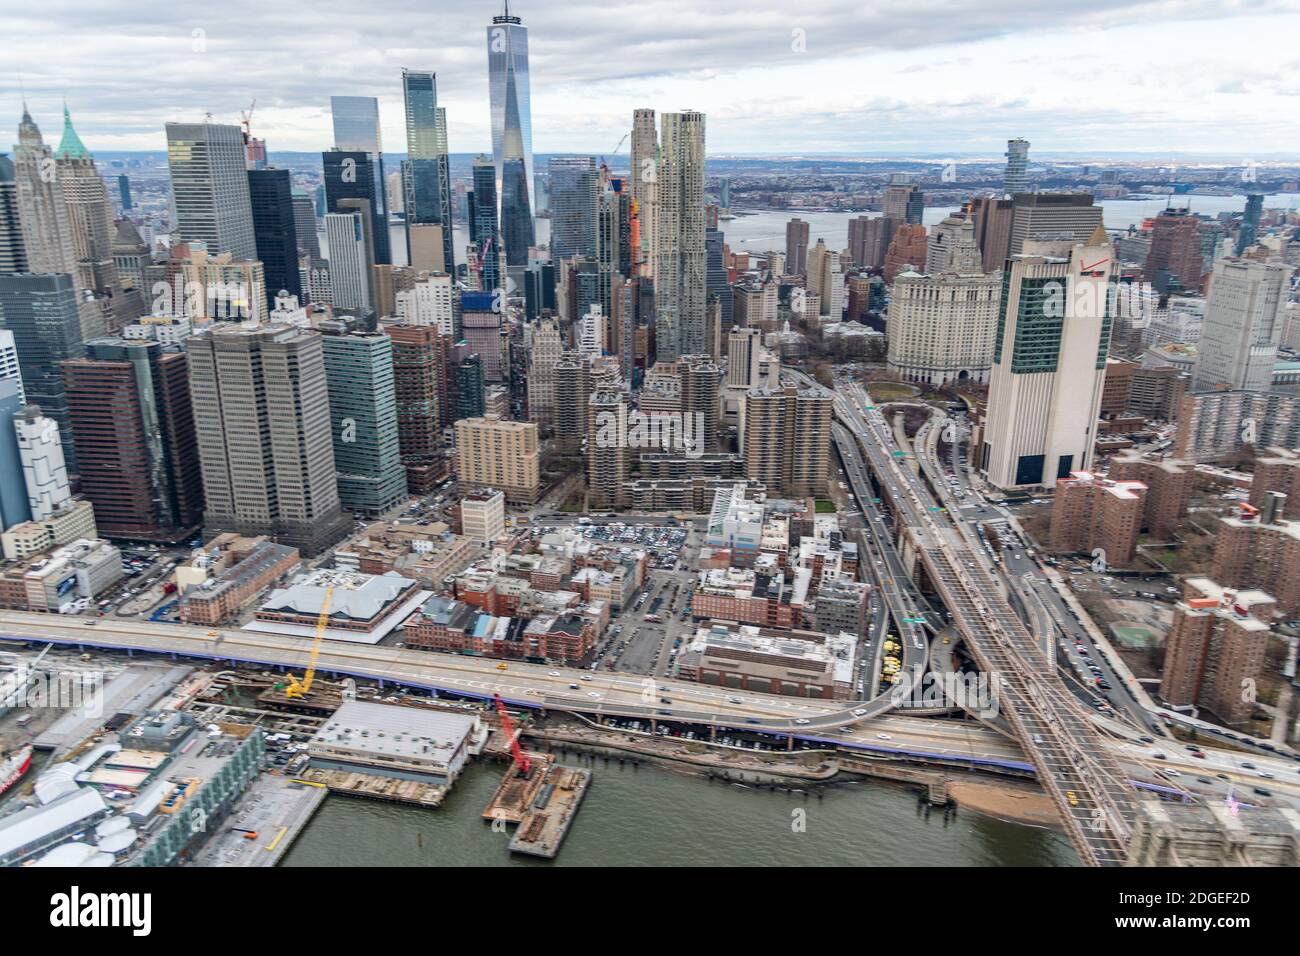 Blurred aerial view of Manhattan buildings and river from helicopter Stock Photo